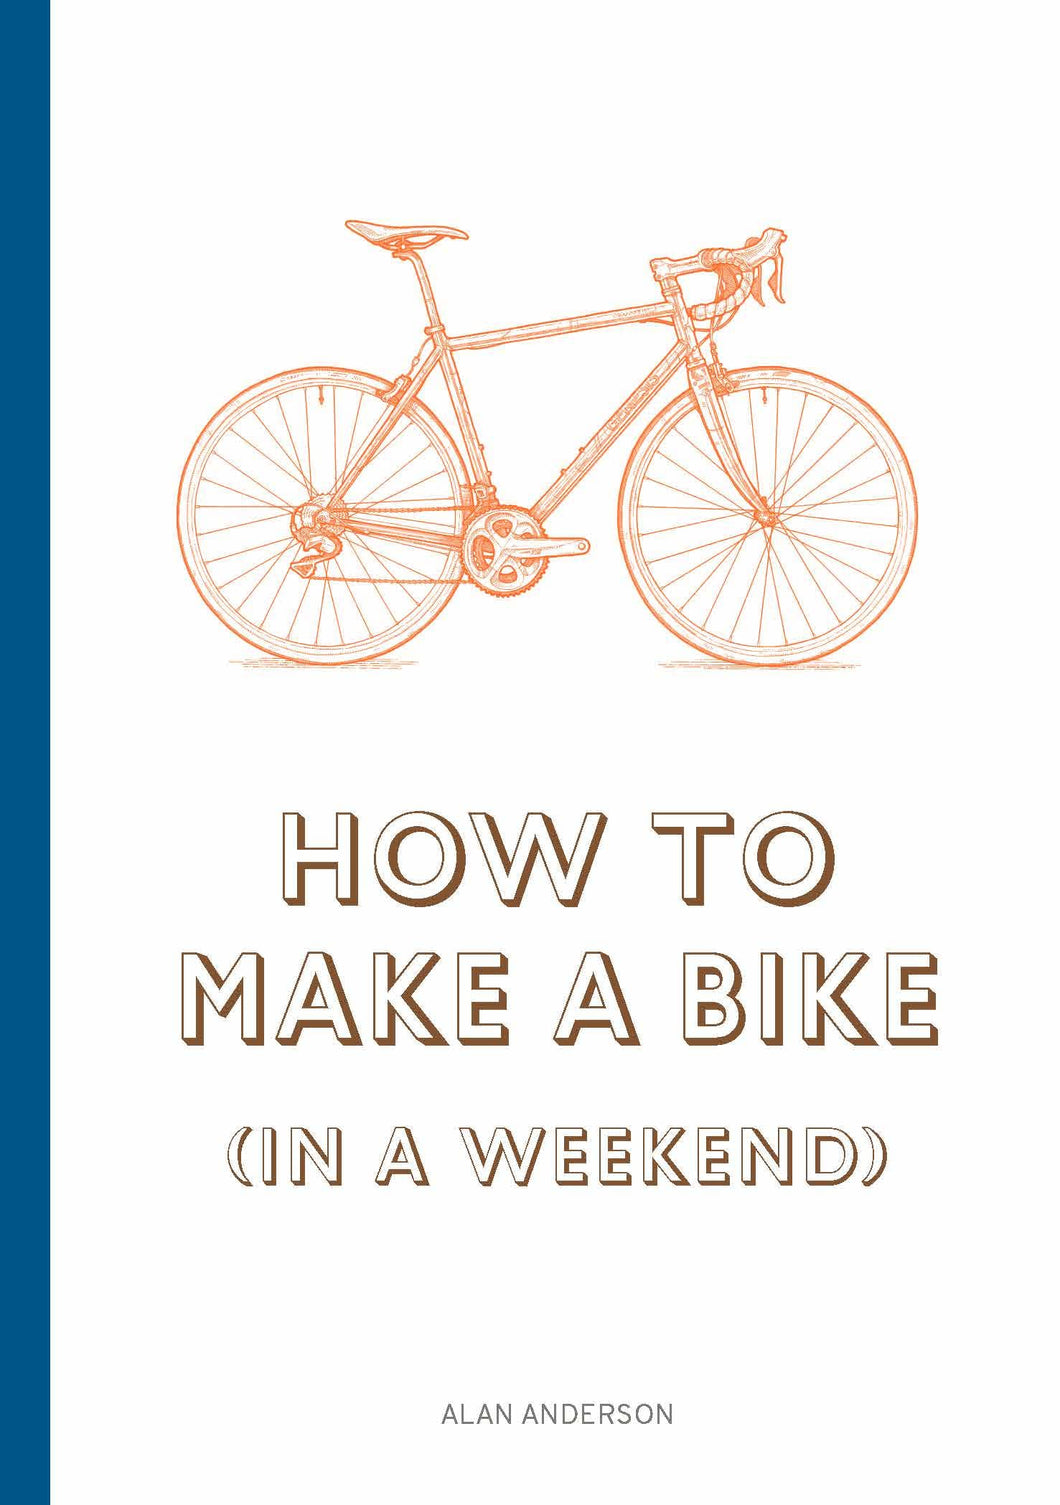 How to build a bike in a weekend